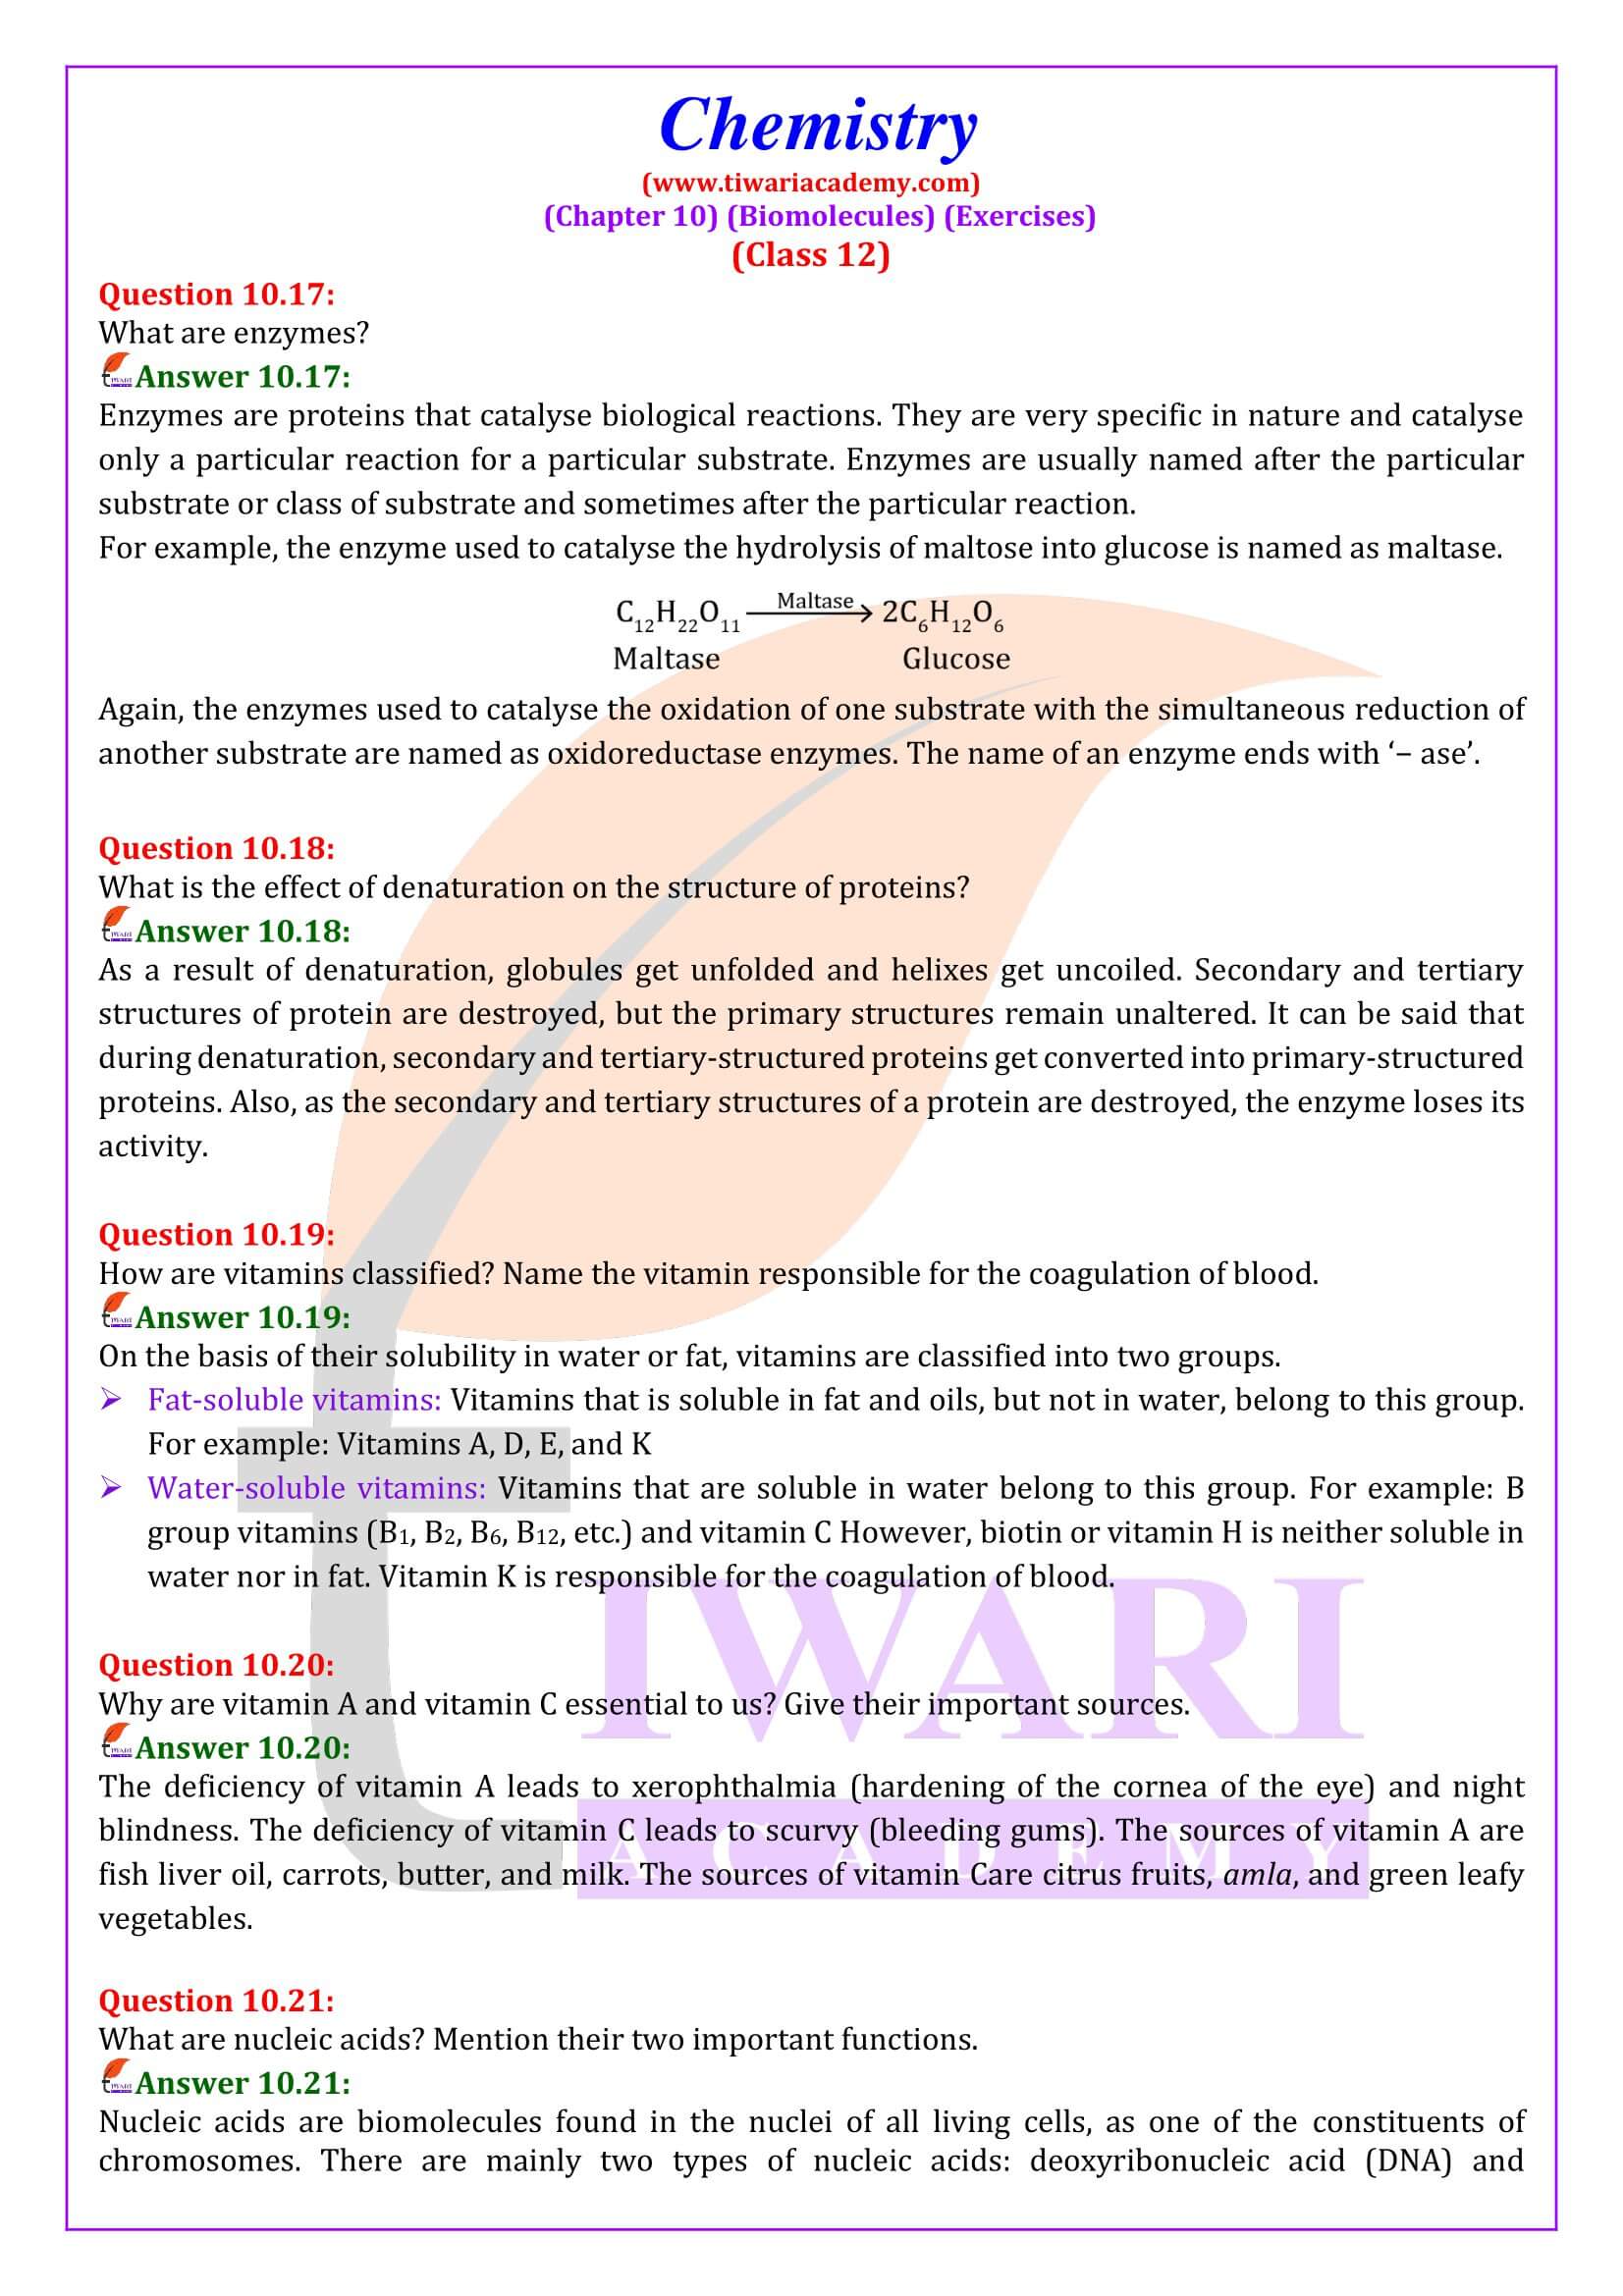 Class 12 Chemistry Chapter 10 Exercises